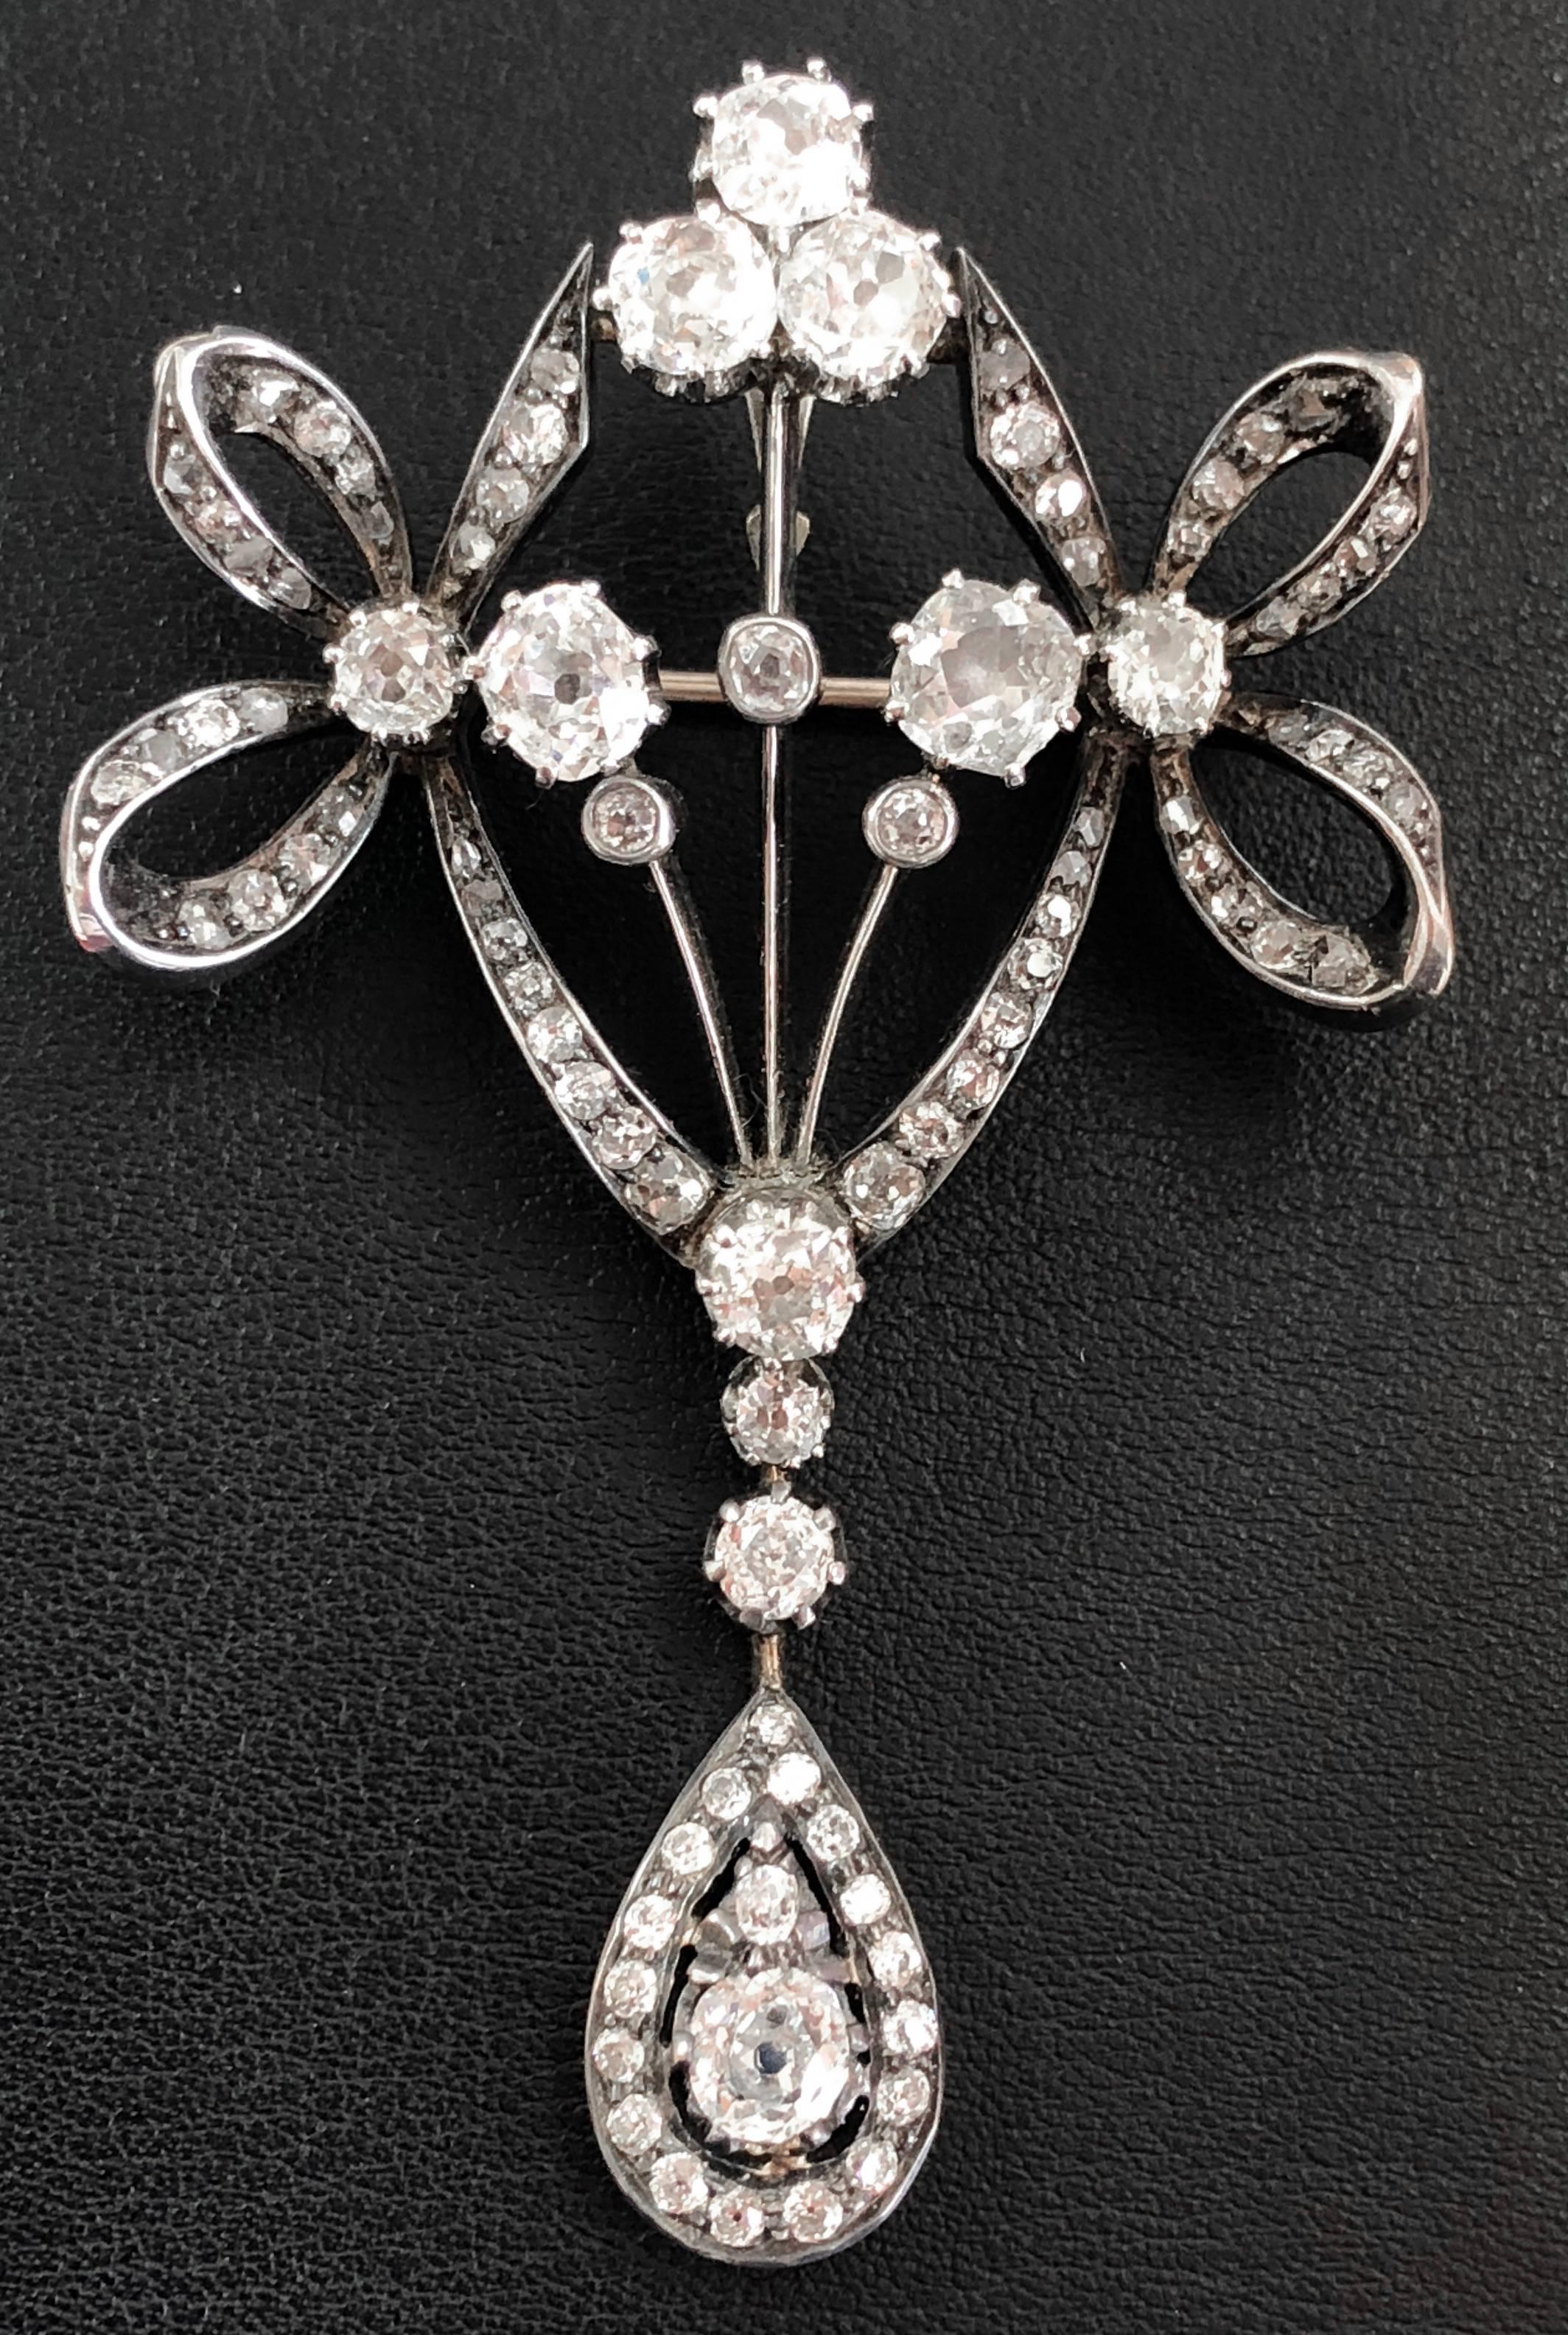 A bow shaped diamond brooch/pendant from the Victorian era, ca. 1880s. It is studded with old European and cushion cut diamonds, weighing circa 5 carats.